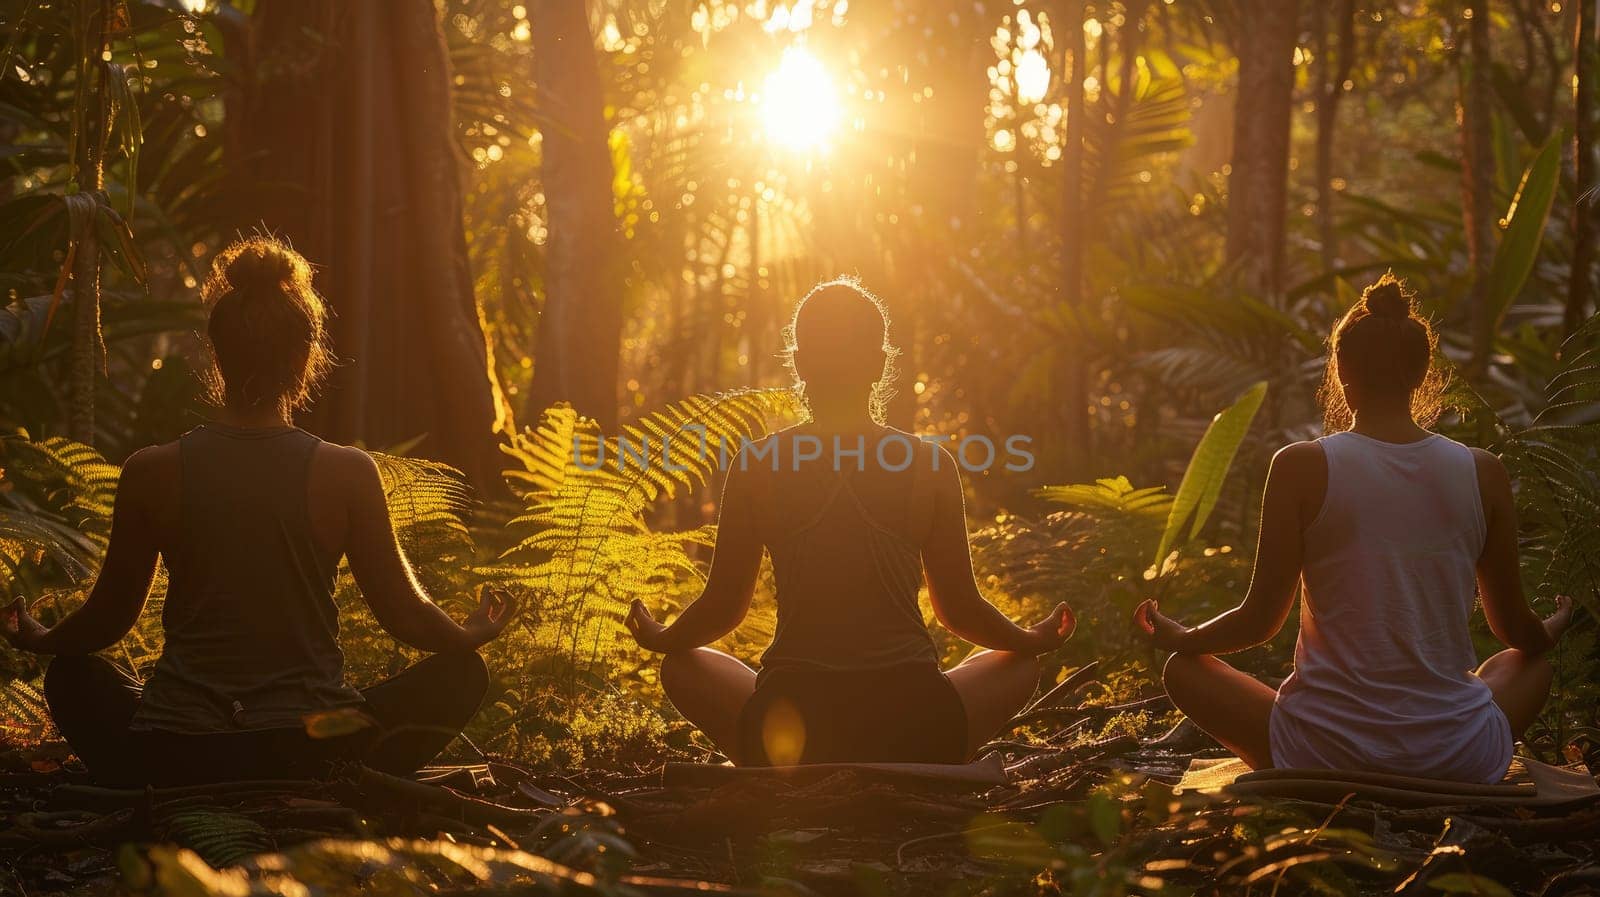 Serene Young Adults Meditating in a Vibrant Forest at Sunrise - Finding Inner Peace and Harmony in Nature..